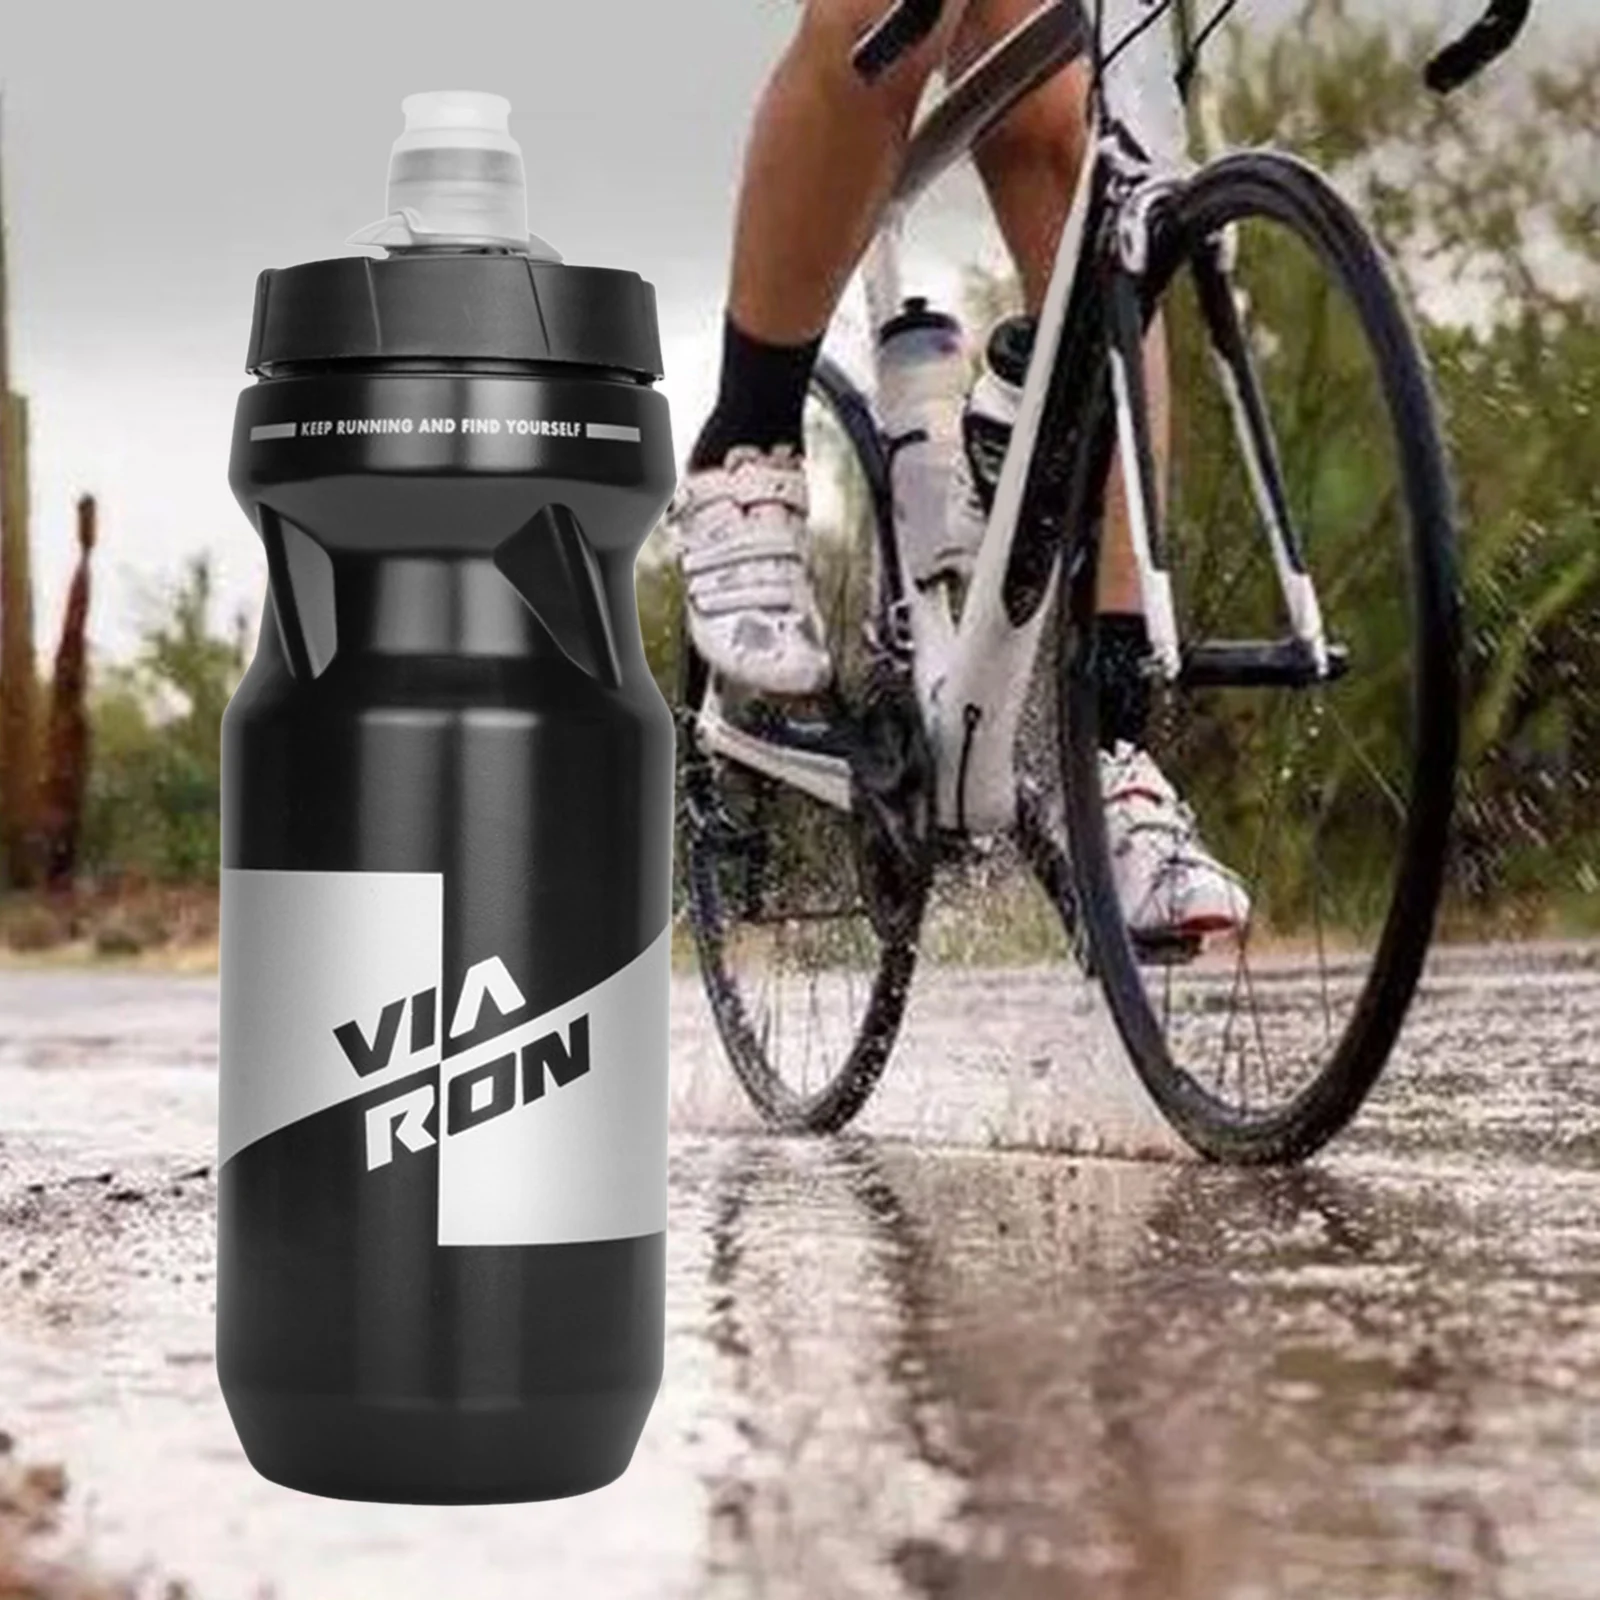 650ml Squeeze PP Sport Water Bottle Sport for Bicycle Workout Fitness Road Bike Mountain Bike Lightweight